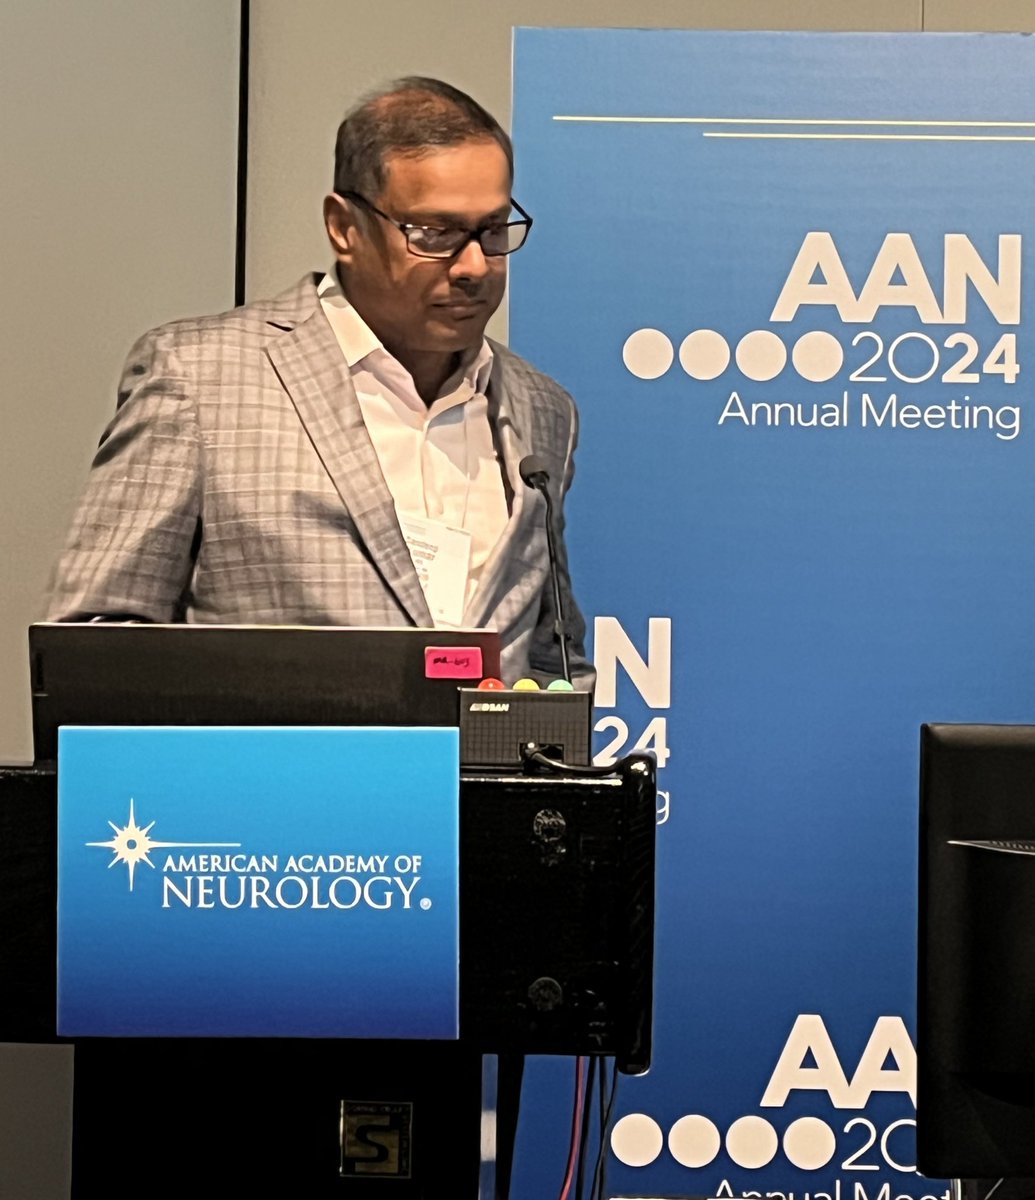 Thanks @AANmember for inviting us to present the #Neurorehabilitation Update Symposium at #AANAM. Much respect to my dedicated colleagues: @ShengLiMDPhD, Dr. Wayne Feng, (newly inducted #FAAN) & Dr. Sandeep Kumar, who spoke & immediately ✈️ for #stroke call @BIDMChealth 🚑🧠.